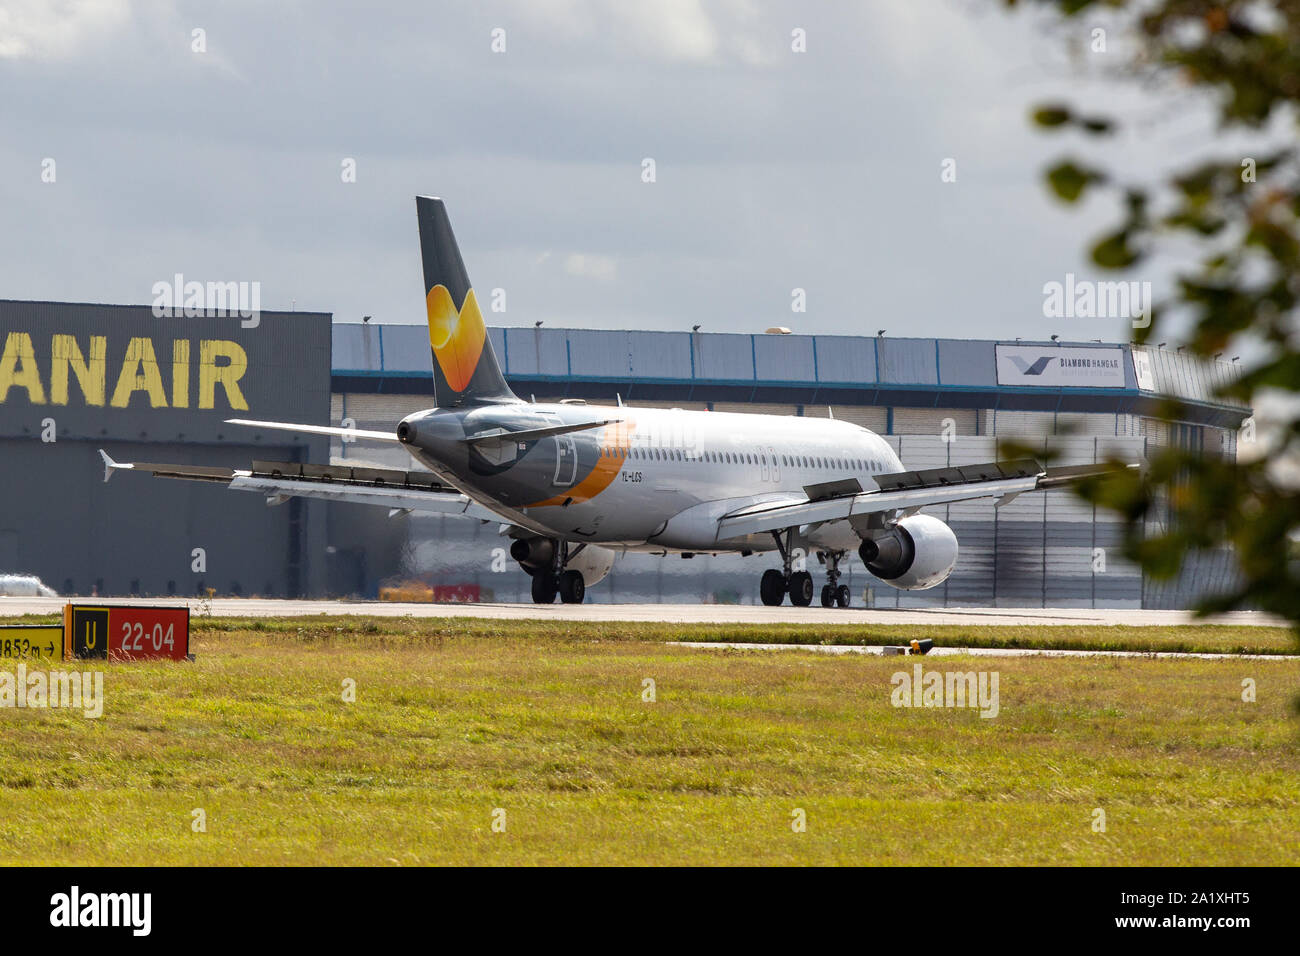 Picture dated September 28th shows a Thomas Cook repatriation flight landing at Stansted Airport,Essex,from Majorca in Spain on Saturday afternoon.The Airbus plane still has the company markings on its tail but the Thomas Cook logo on the front has been removed.  More than half of the 150,000 holidaymakers left stranded abroad after the collapse of travel firm Thomas Cook have been repatriated to Britain, the Civil Aviation Authority regulator said Saturday.  The CAA said 76,000 people had been returned in the first five days of Operation Matterhorn C Britain's biggest peacetime repatriation. Stock Photo